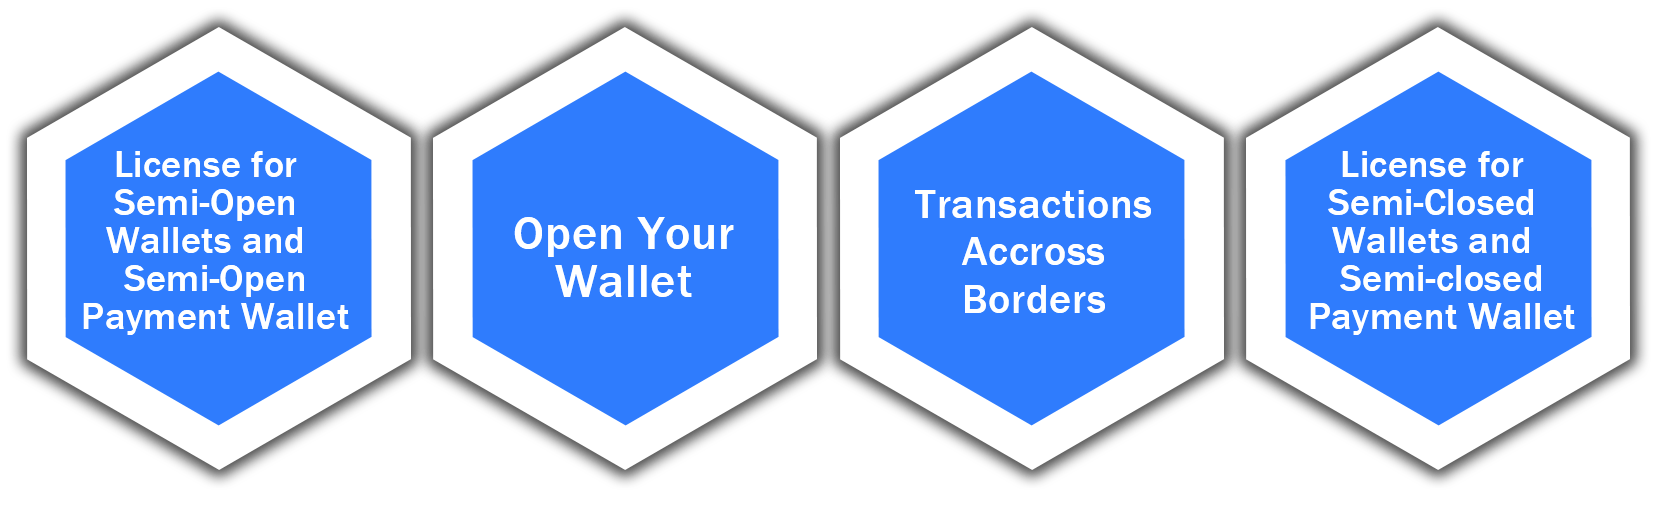 Payment Wallet Licenses of Various Types